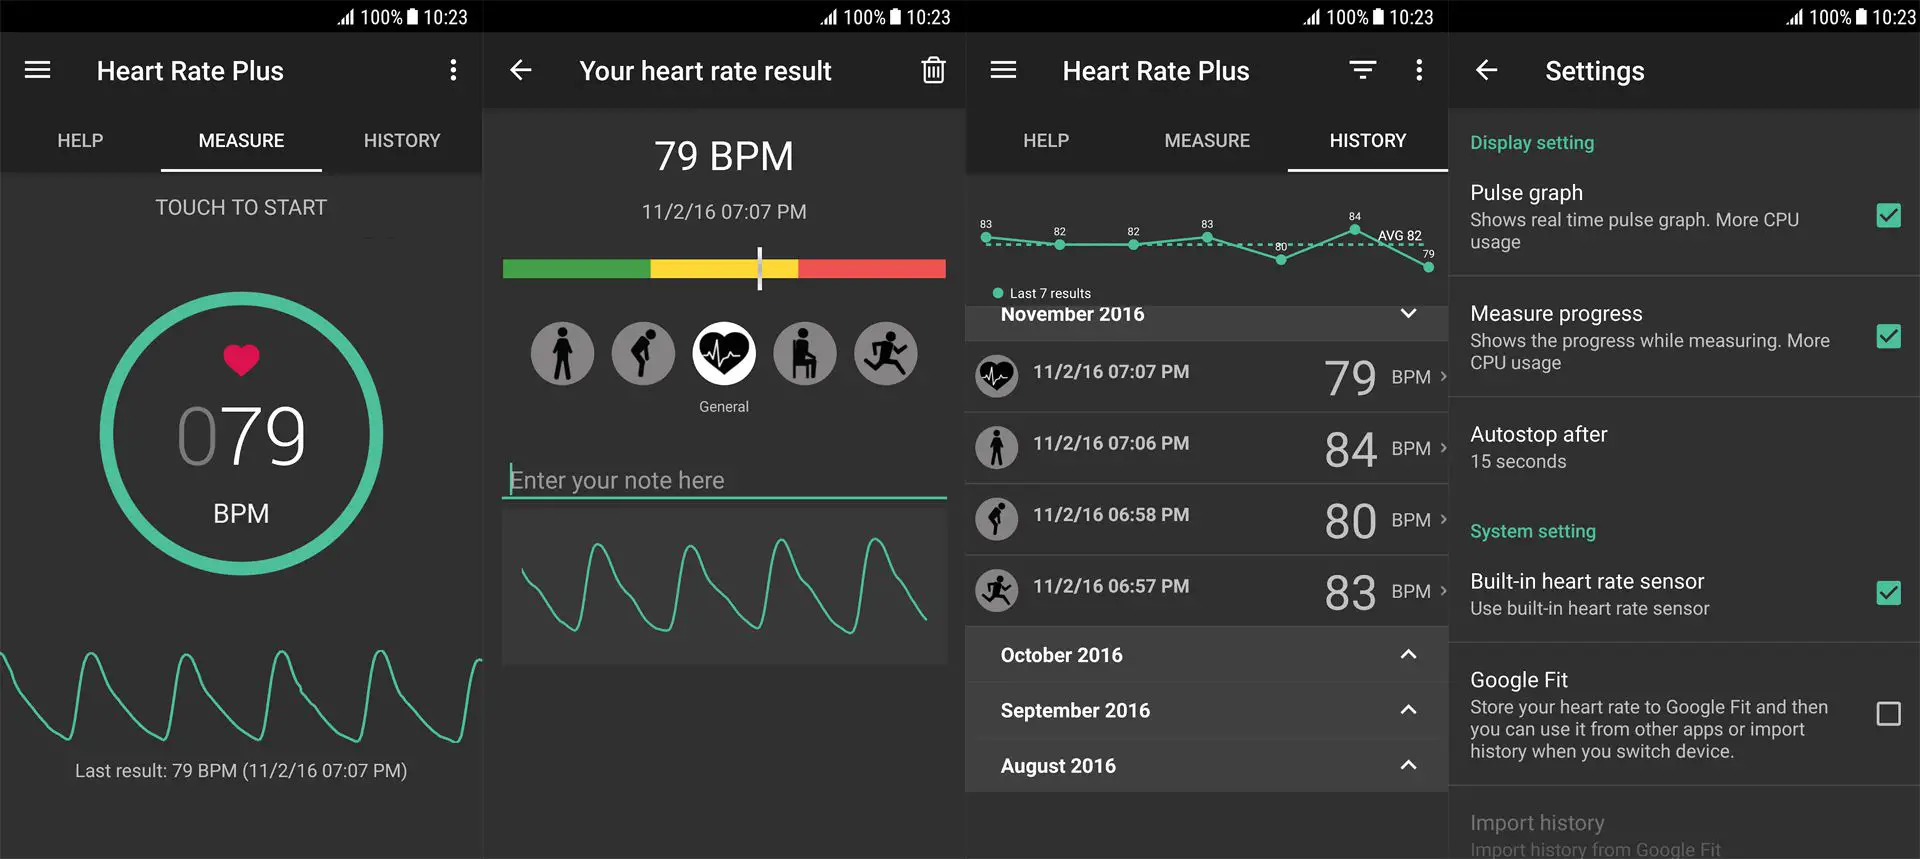 Aplicativo Heart Rate Plus no Android.